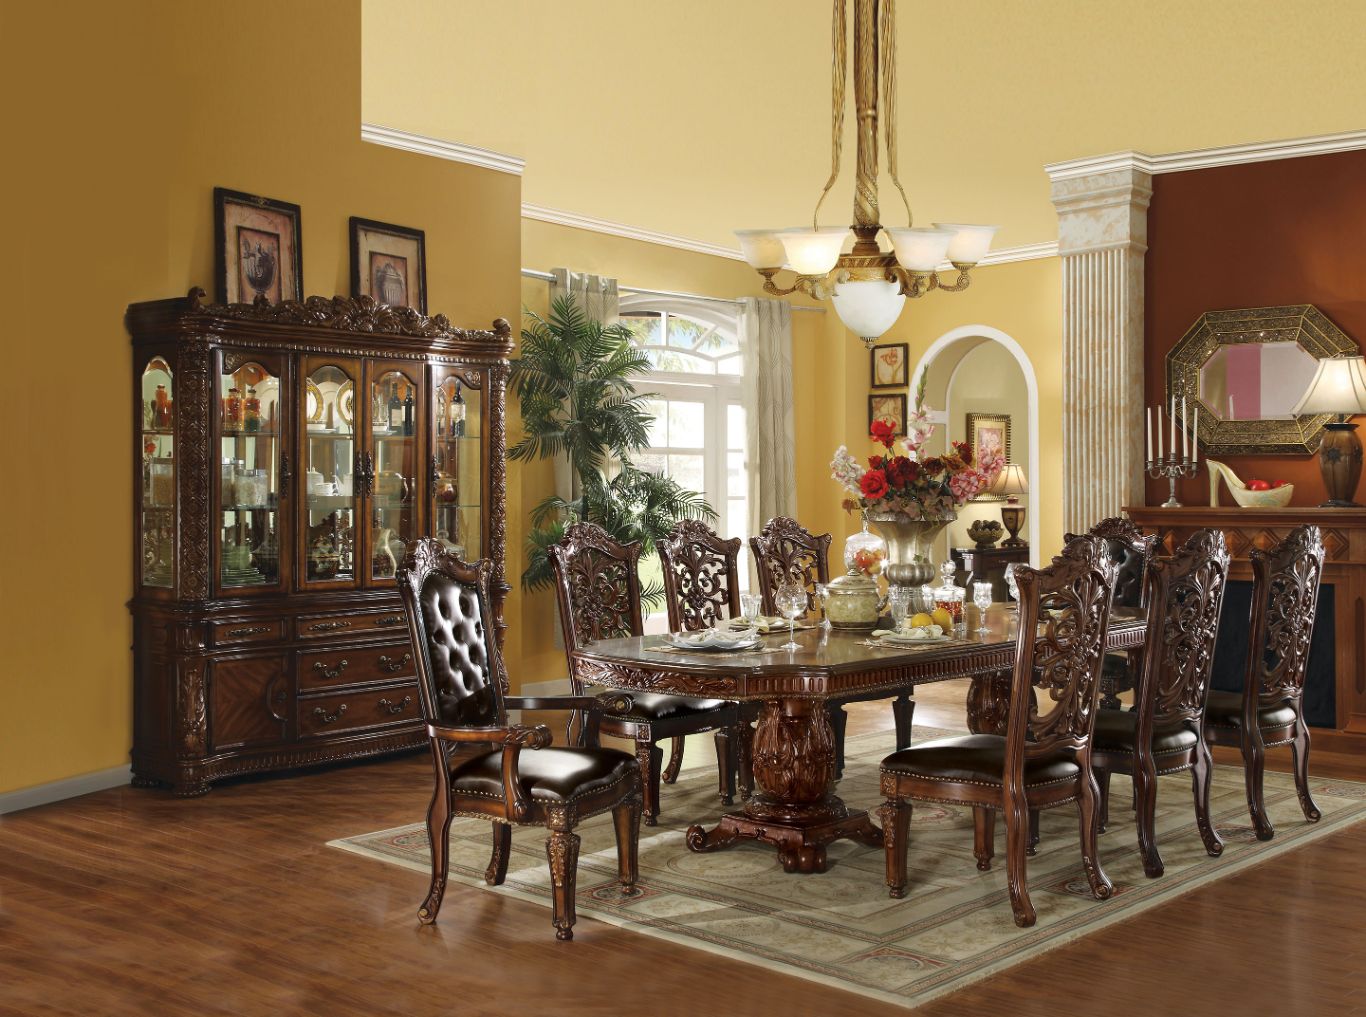 Vendome Dining Table